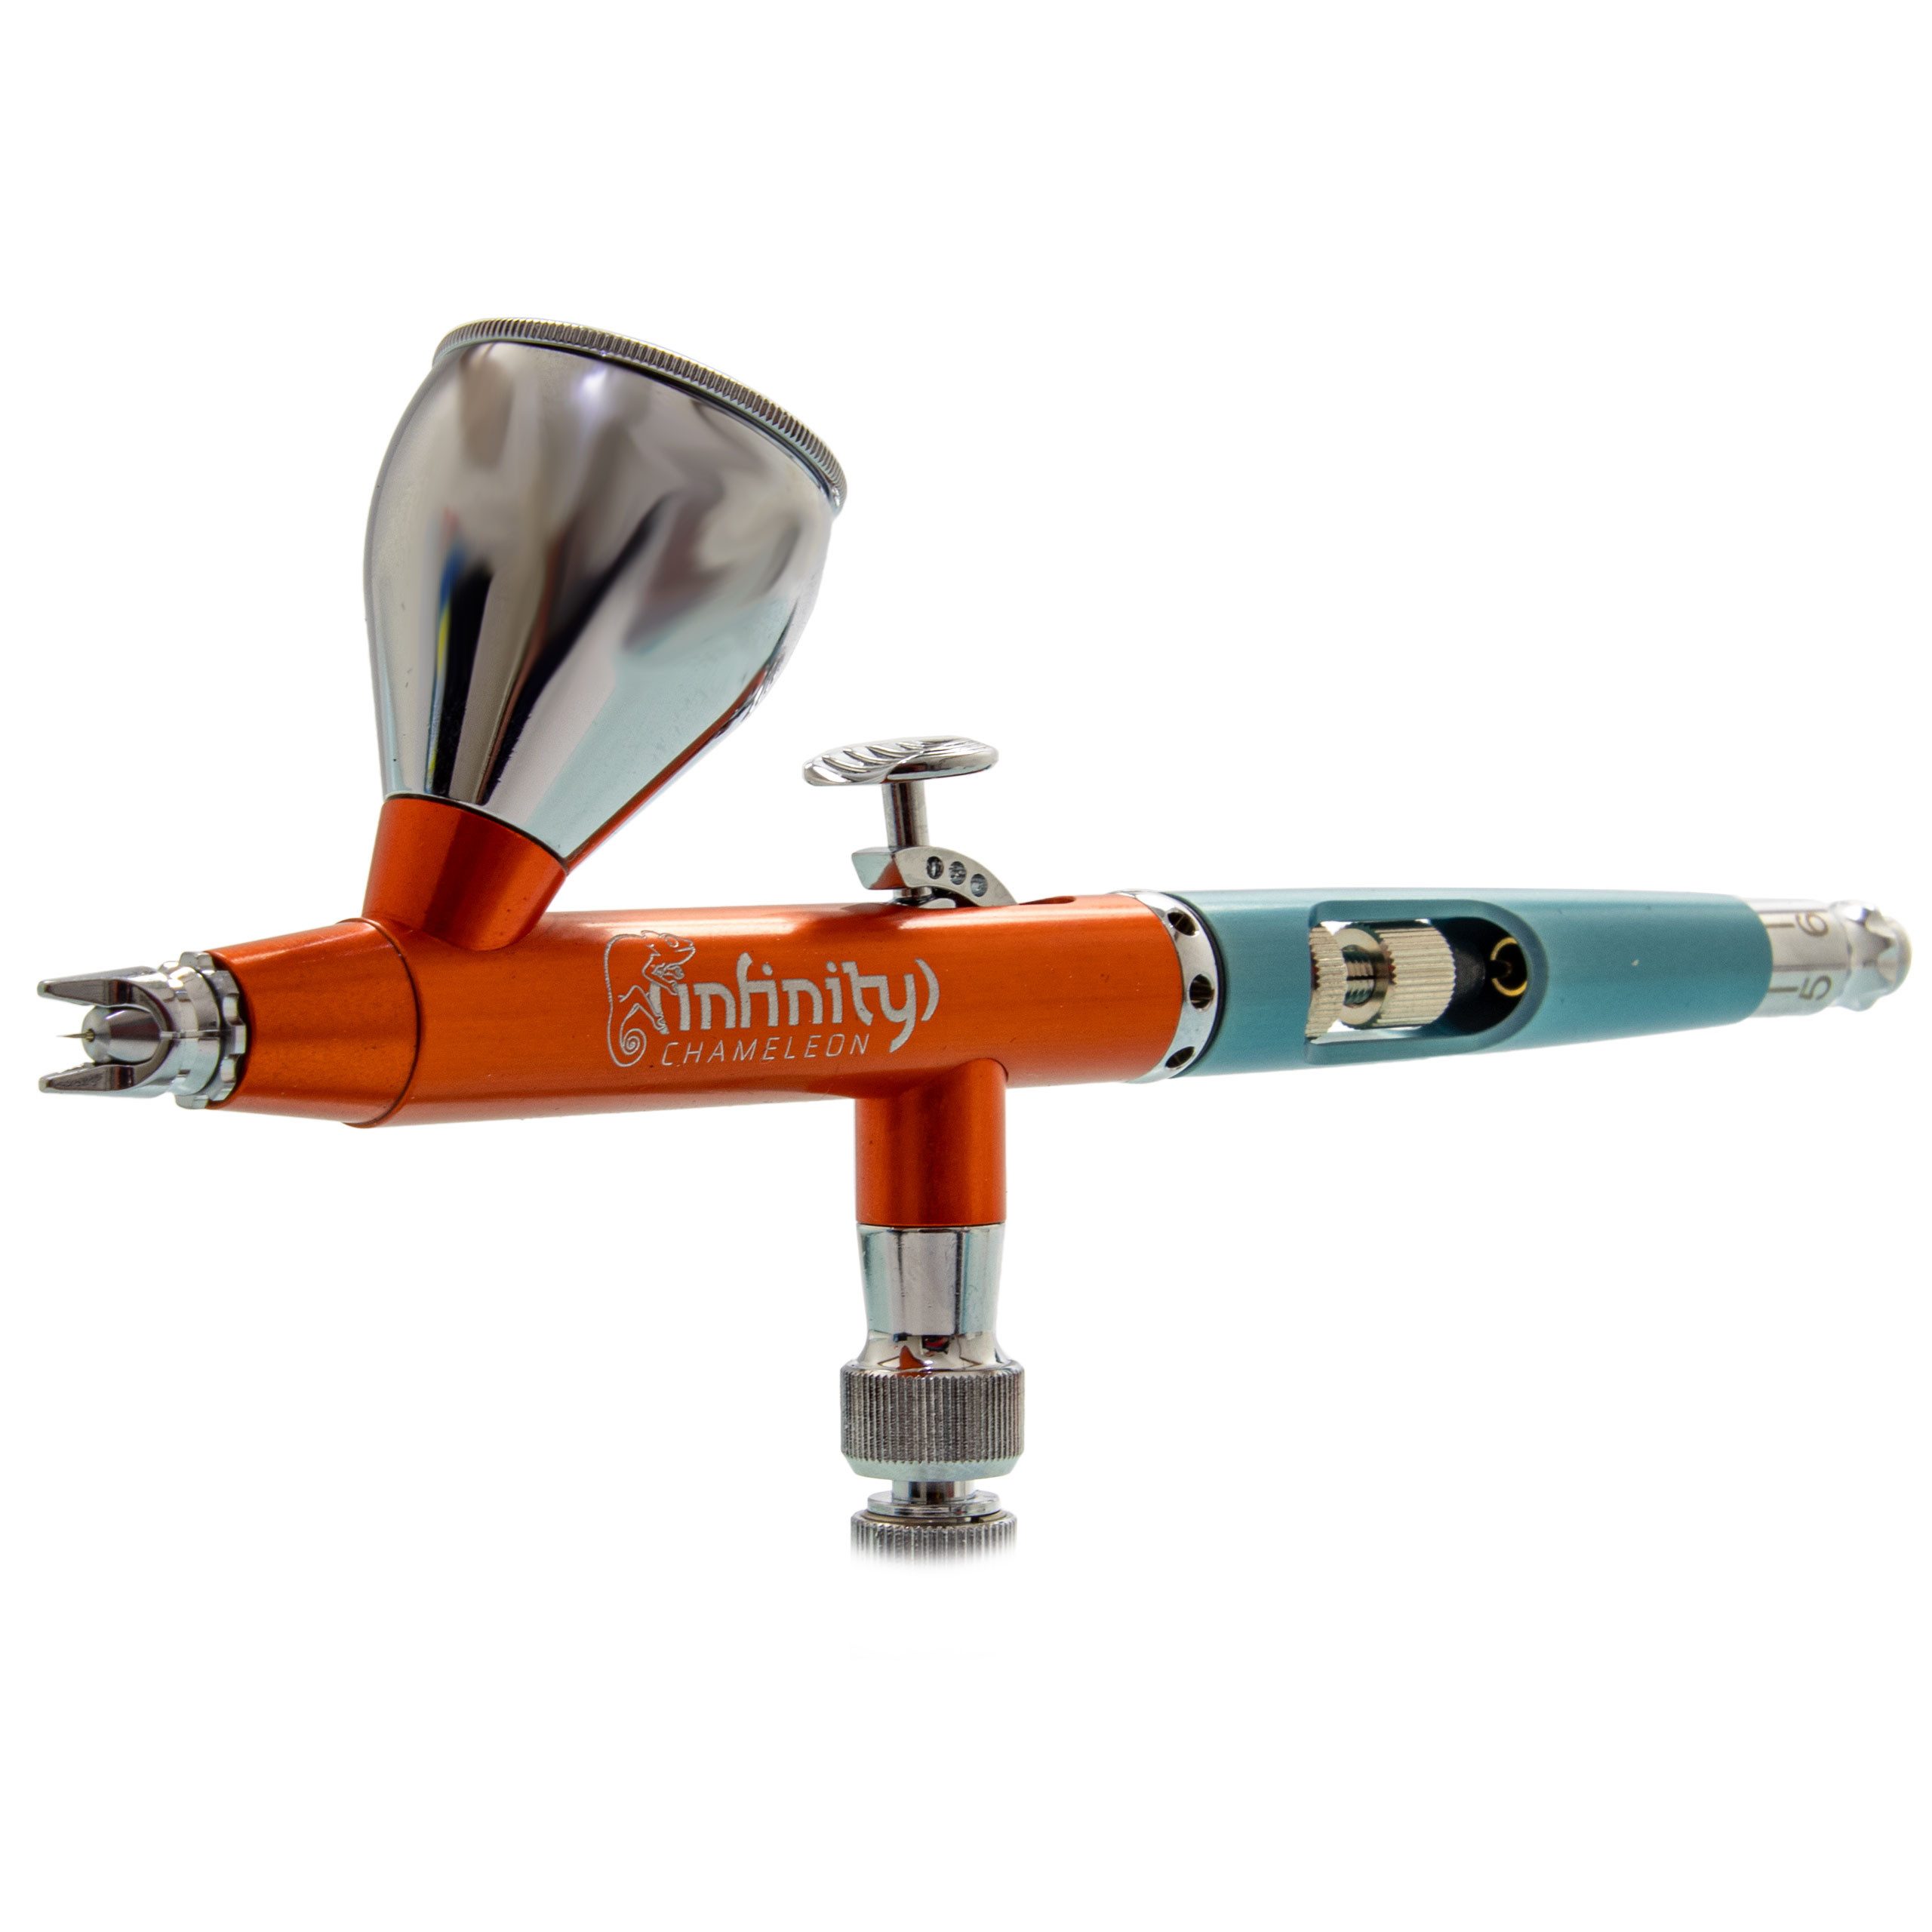 Harder & Steenbeck Airbrushpistole Chameleon Infinity 2in1 Summer Limited Edition Airbrush Pistole 133911